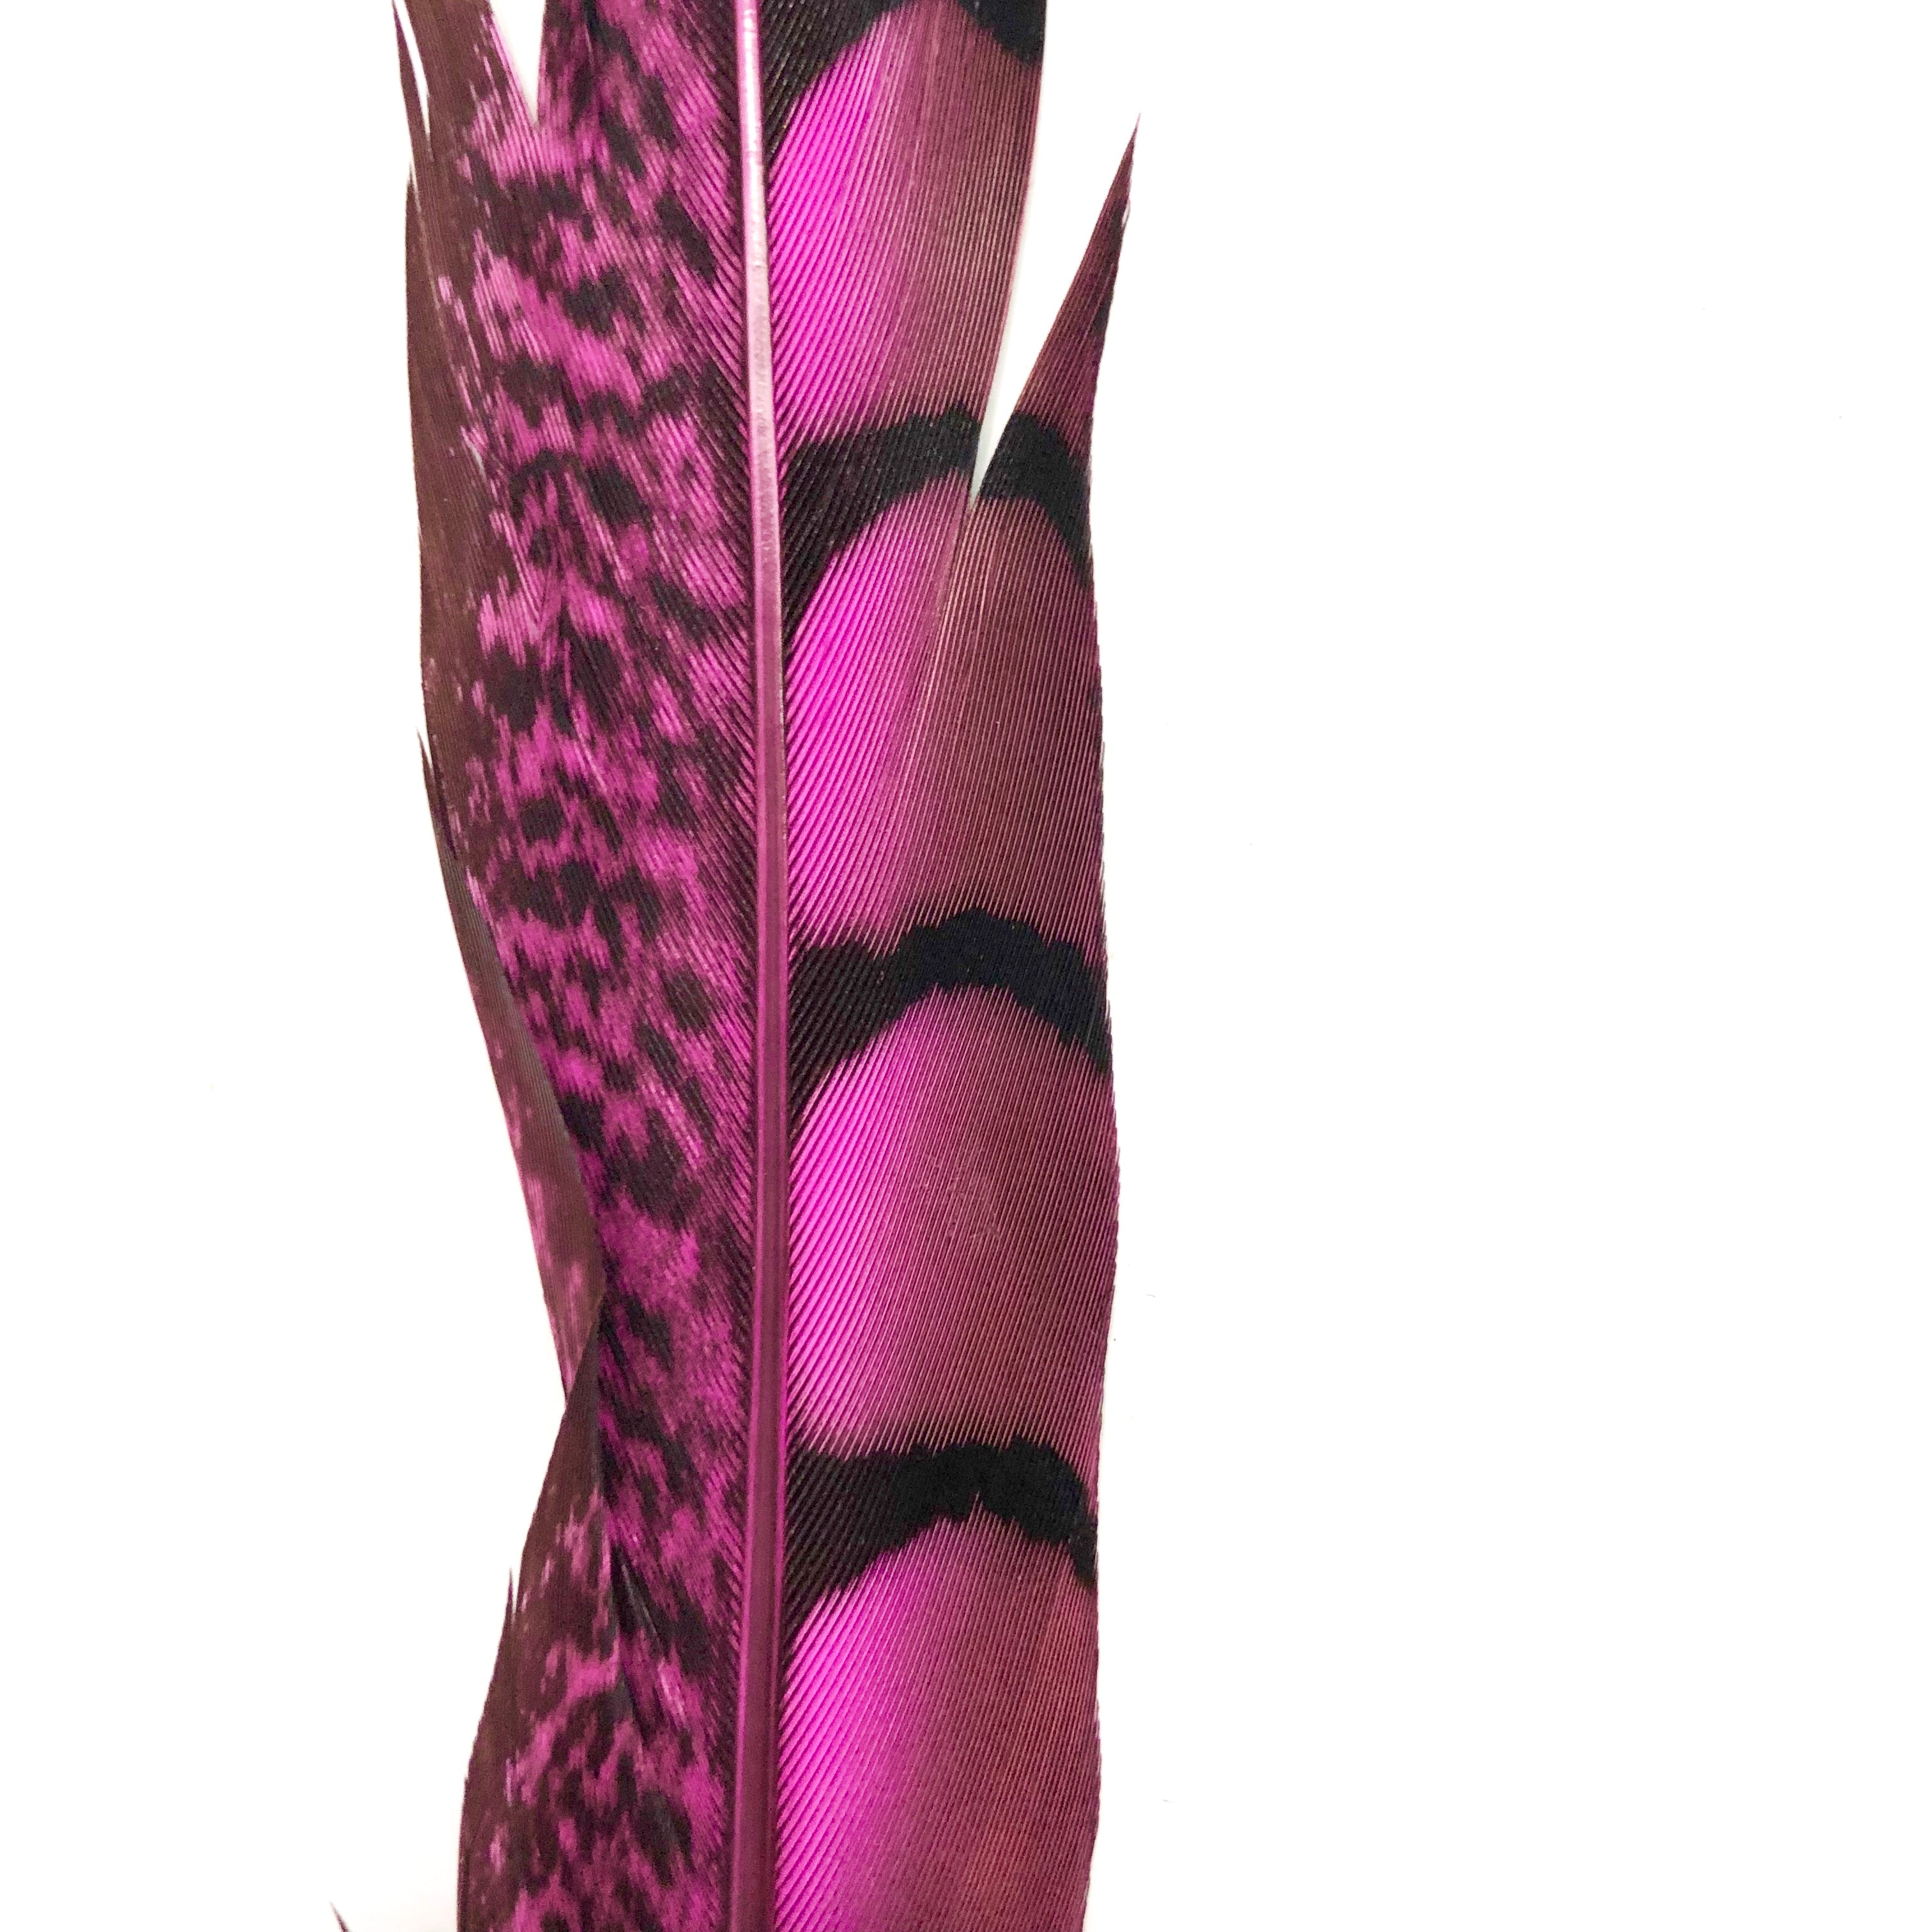 10" to 20" Lady Amherst Pheasant Side Tail Feather - Hot Pink